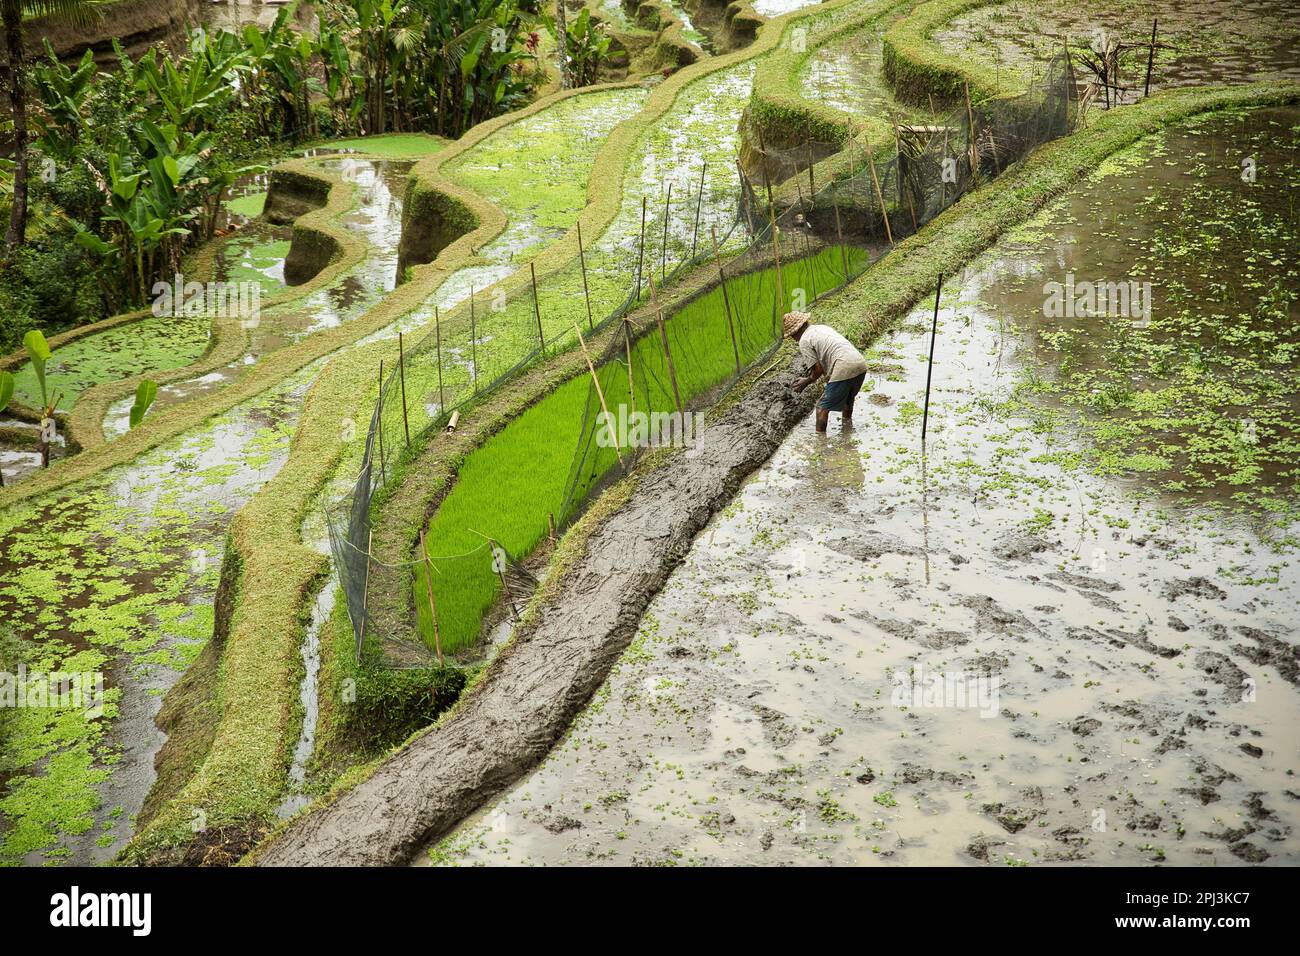 The tropical Tegalalang rice terraces of Ubud on Bali, Indonesia, surrounded by palm trees and a rice farmer working in the rice pond. Stock Photo